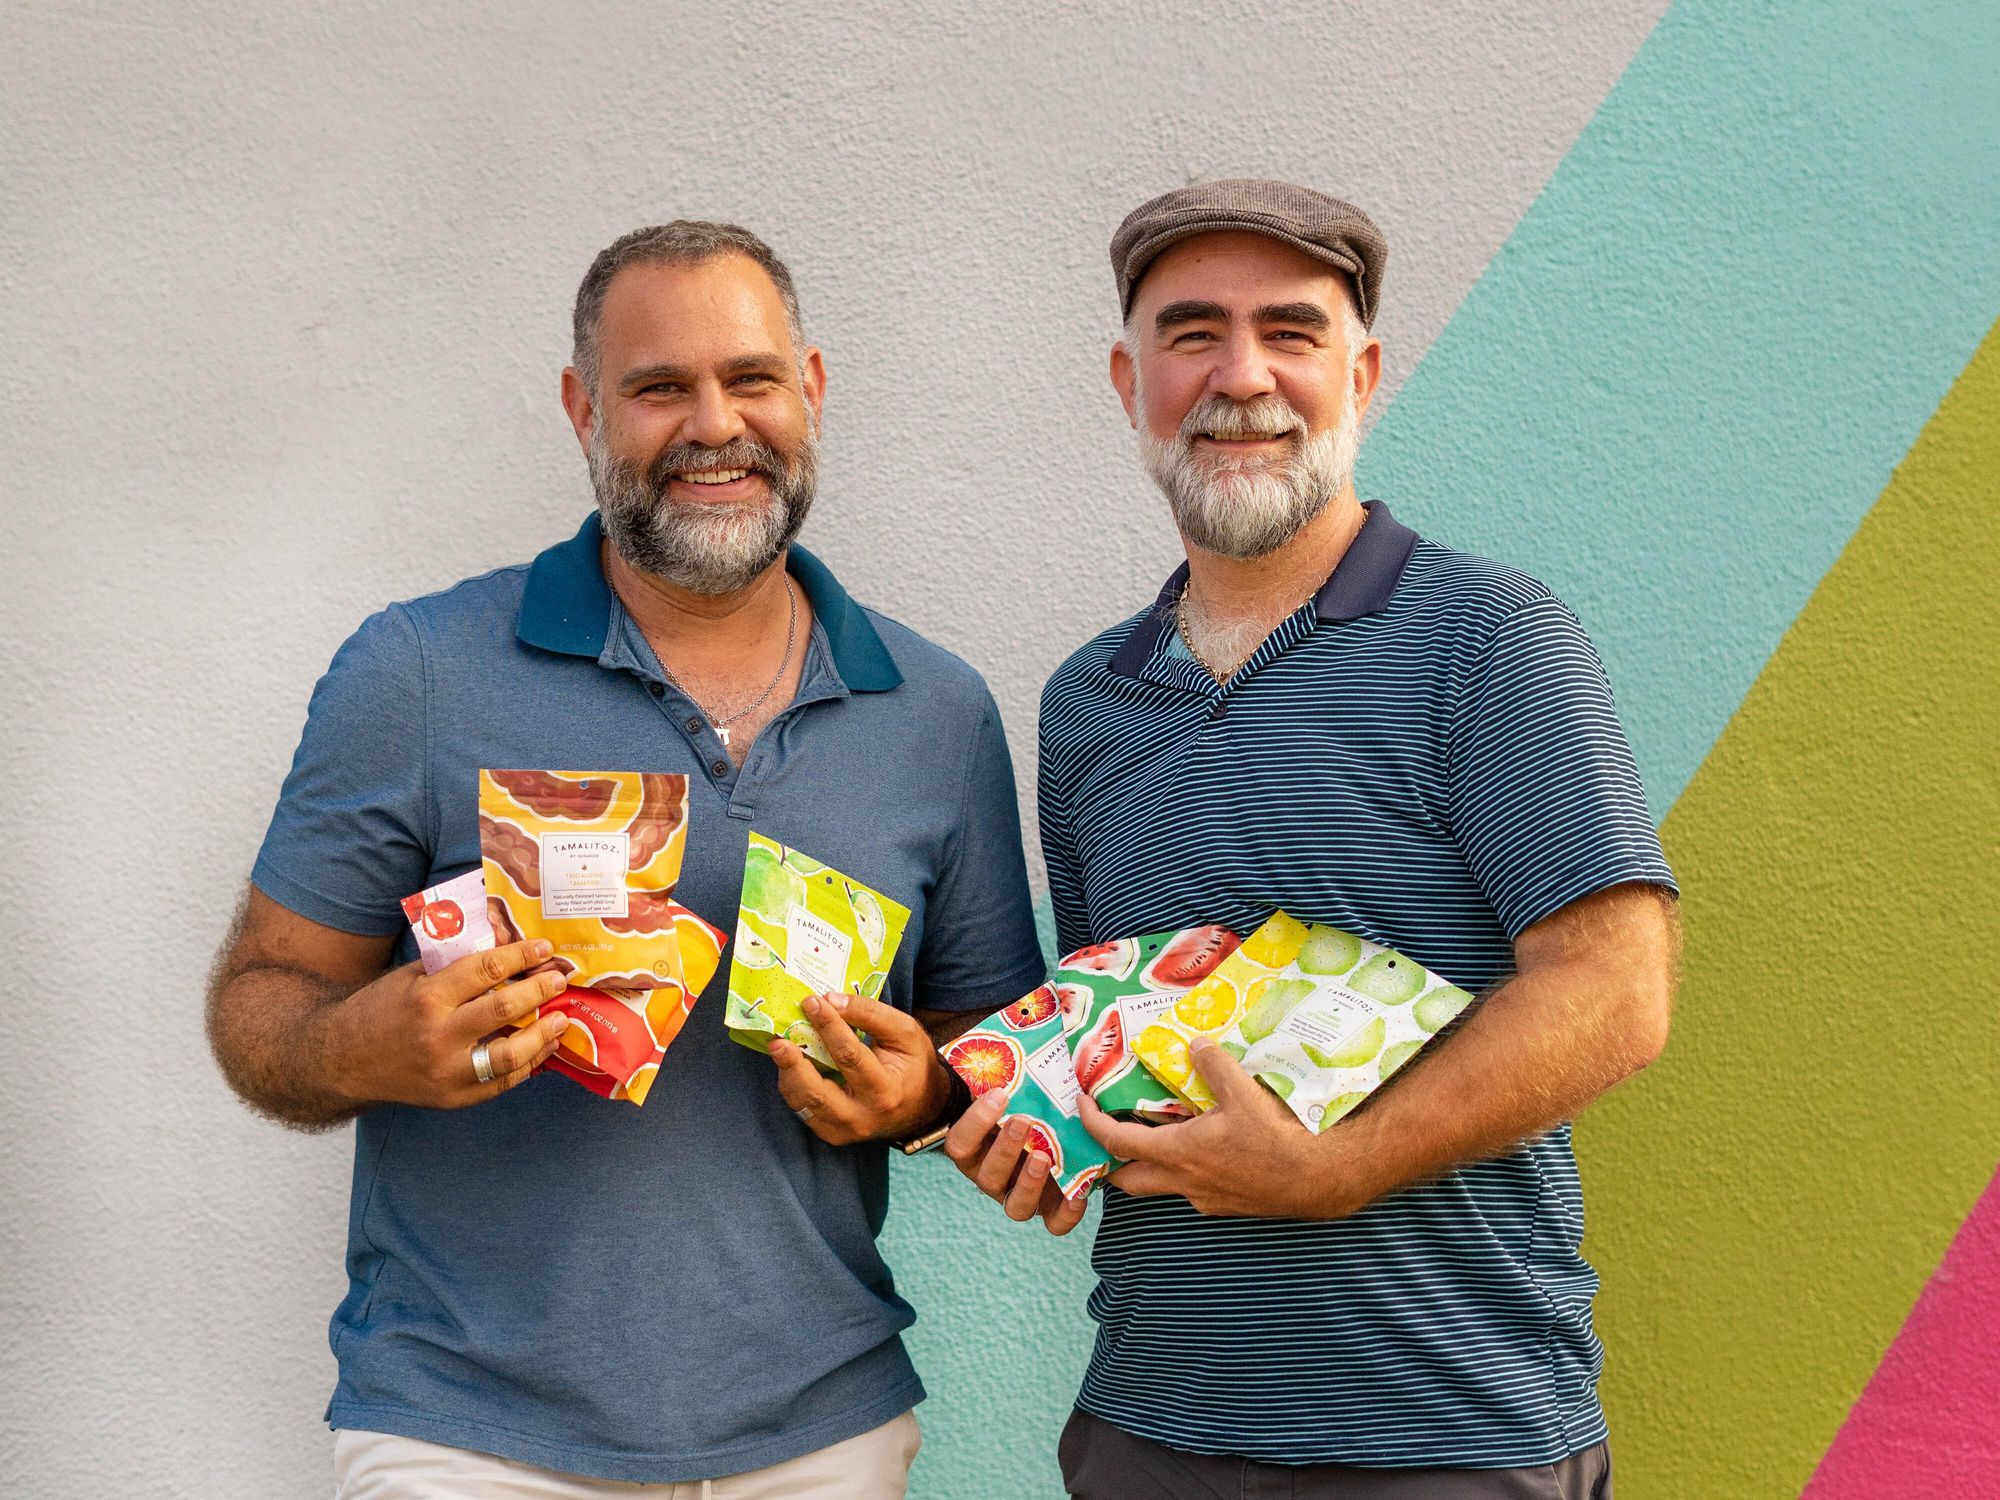 Tamalitoz owners pose with Austin-based candy. Cropped.